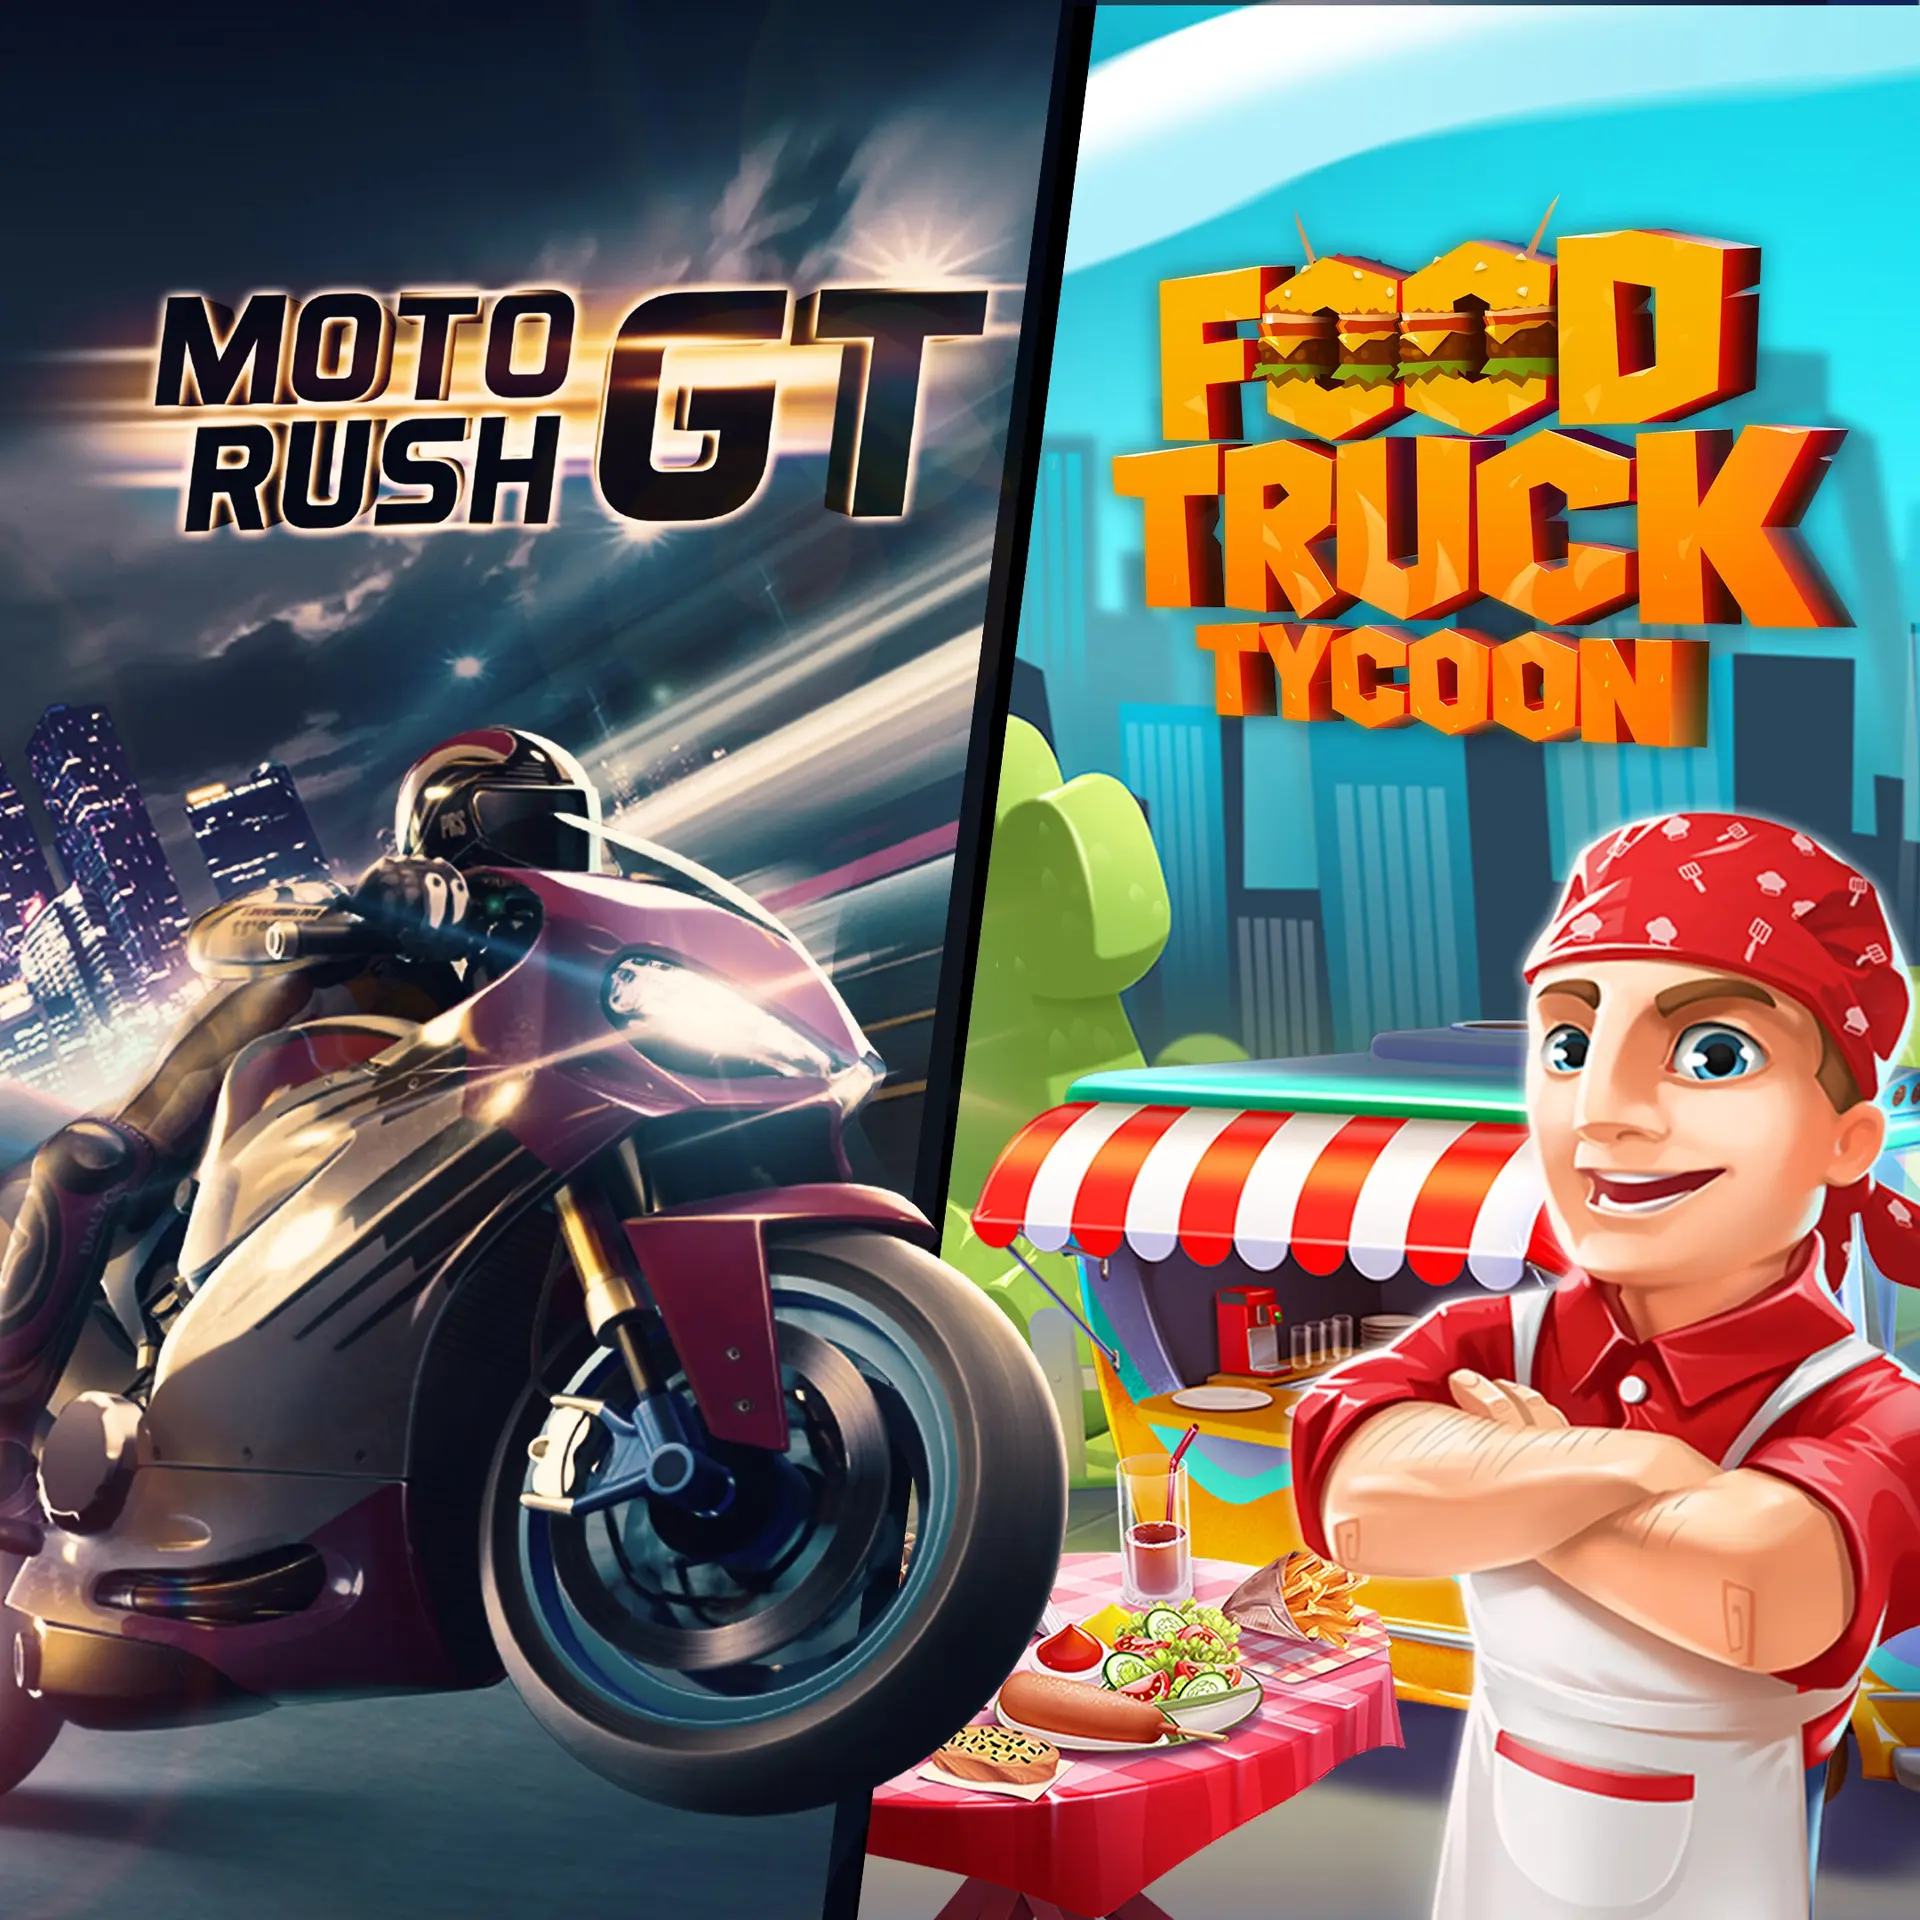 Moto Rush GT + Food Truck Tycoon (XBOX One - Cheapest Store)